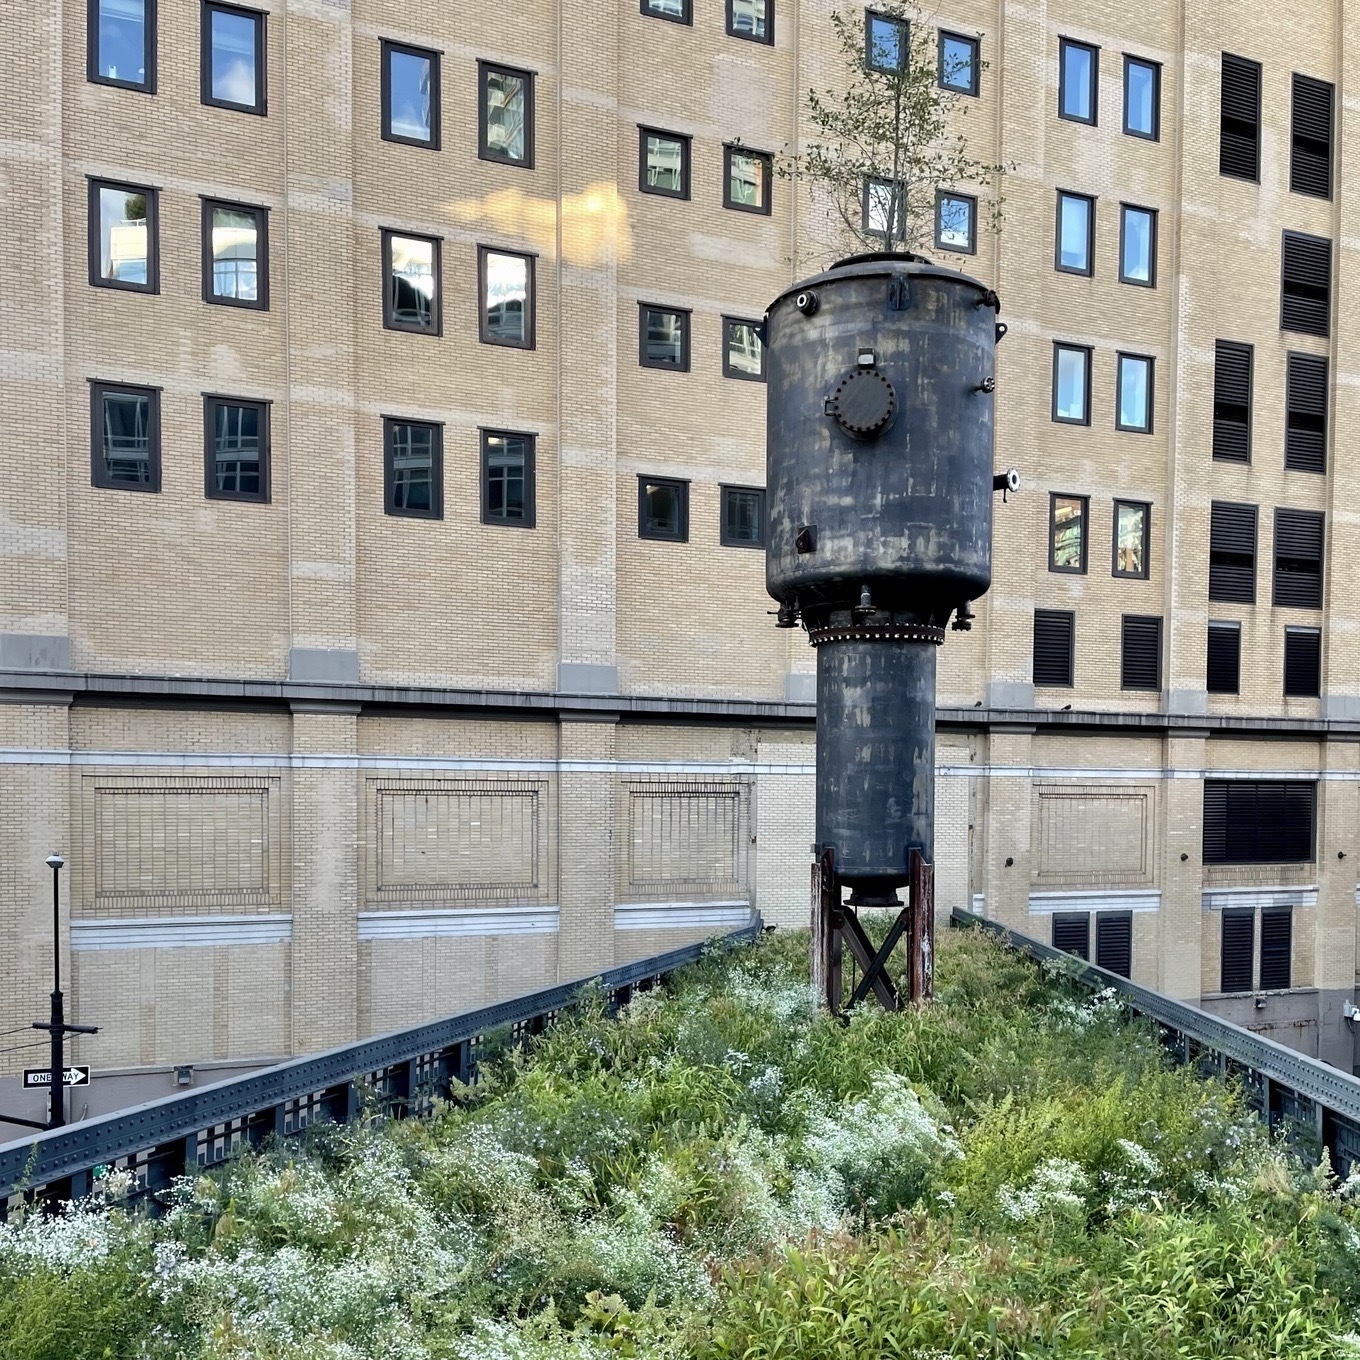 Watertower from within low grasses on the Highline